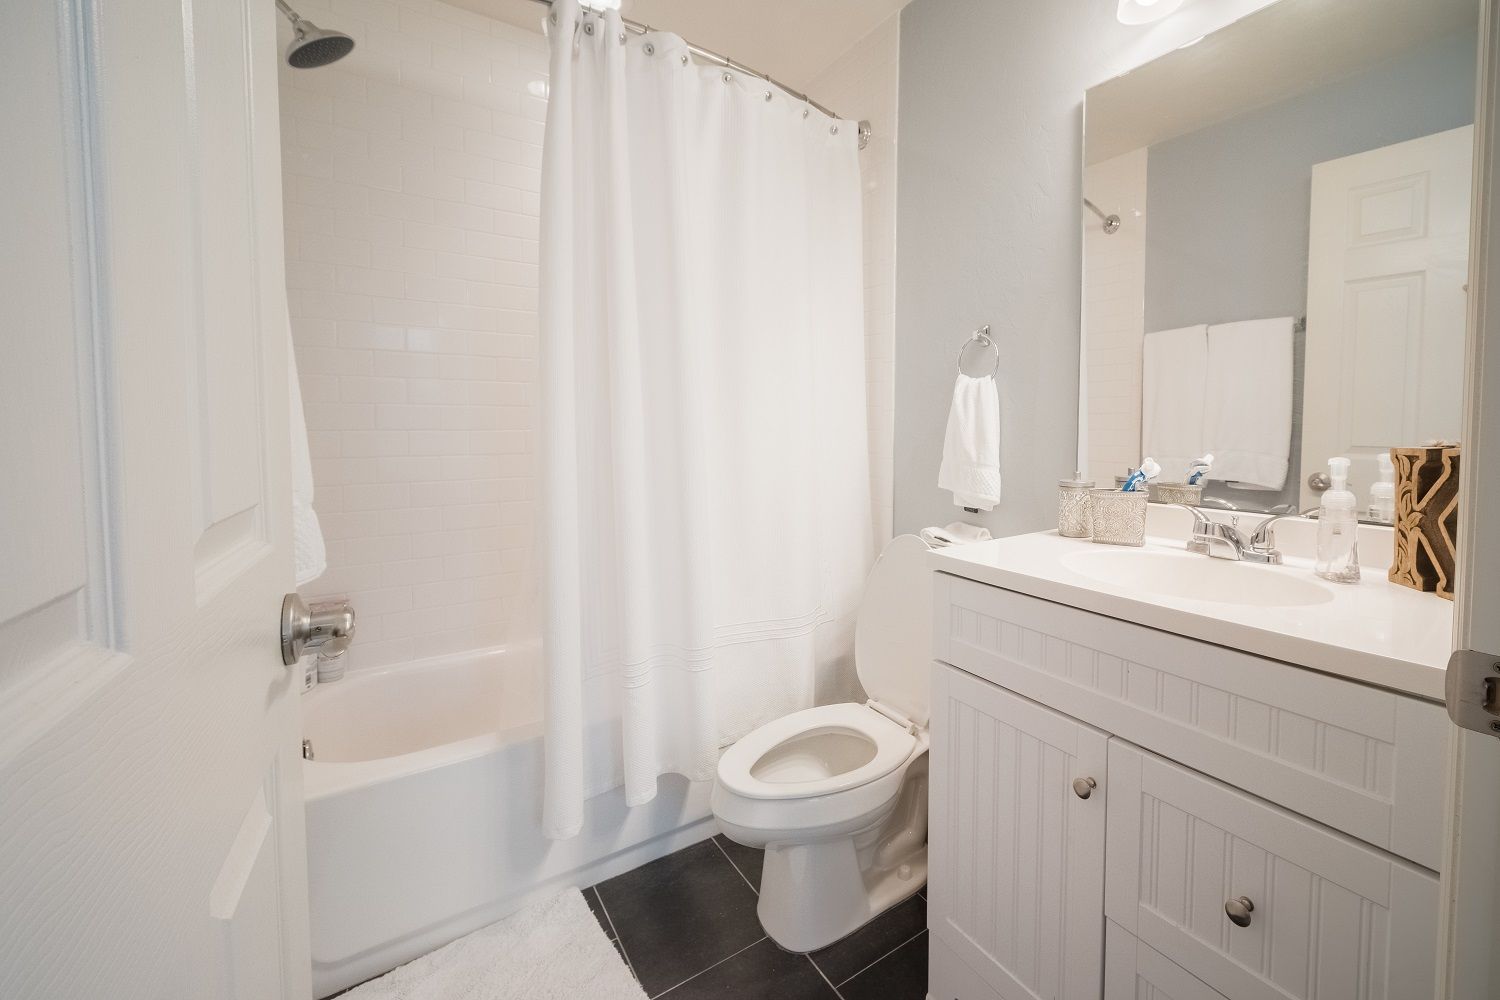 Each bedroom has its own private bathroom with plenty of space